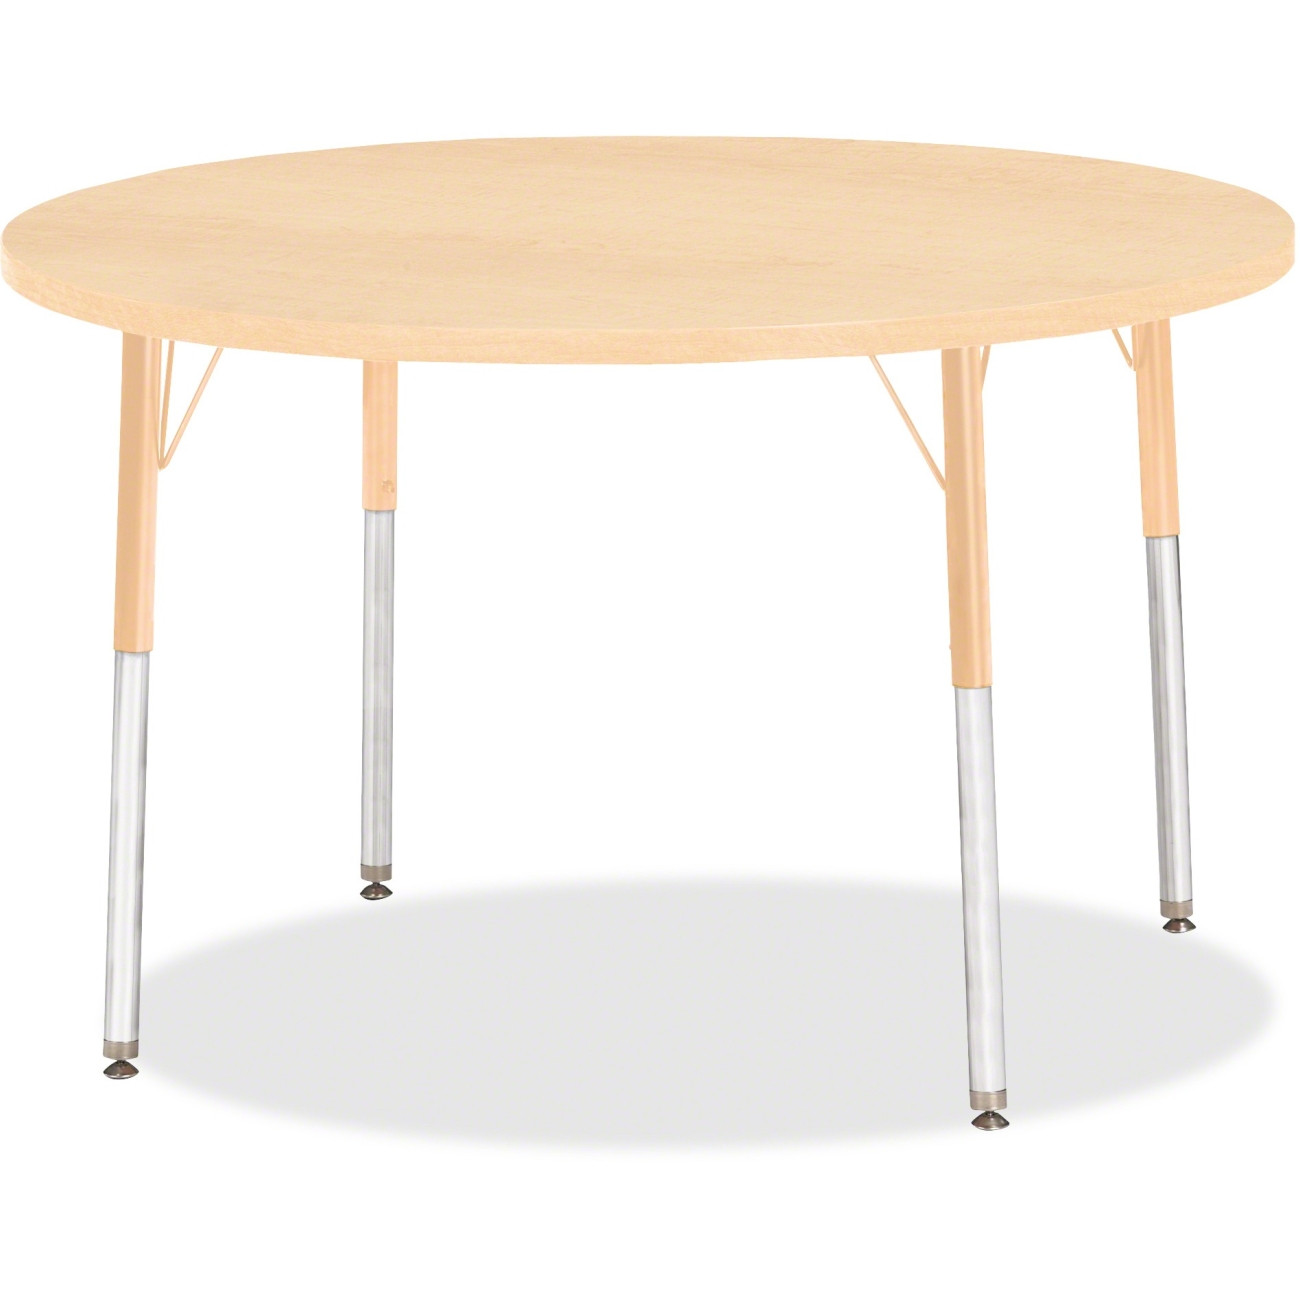 Craft Tables For Adults
 Printer